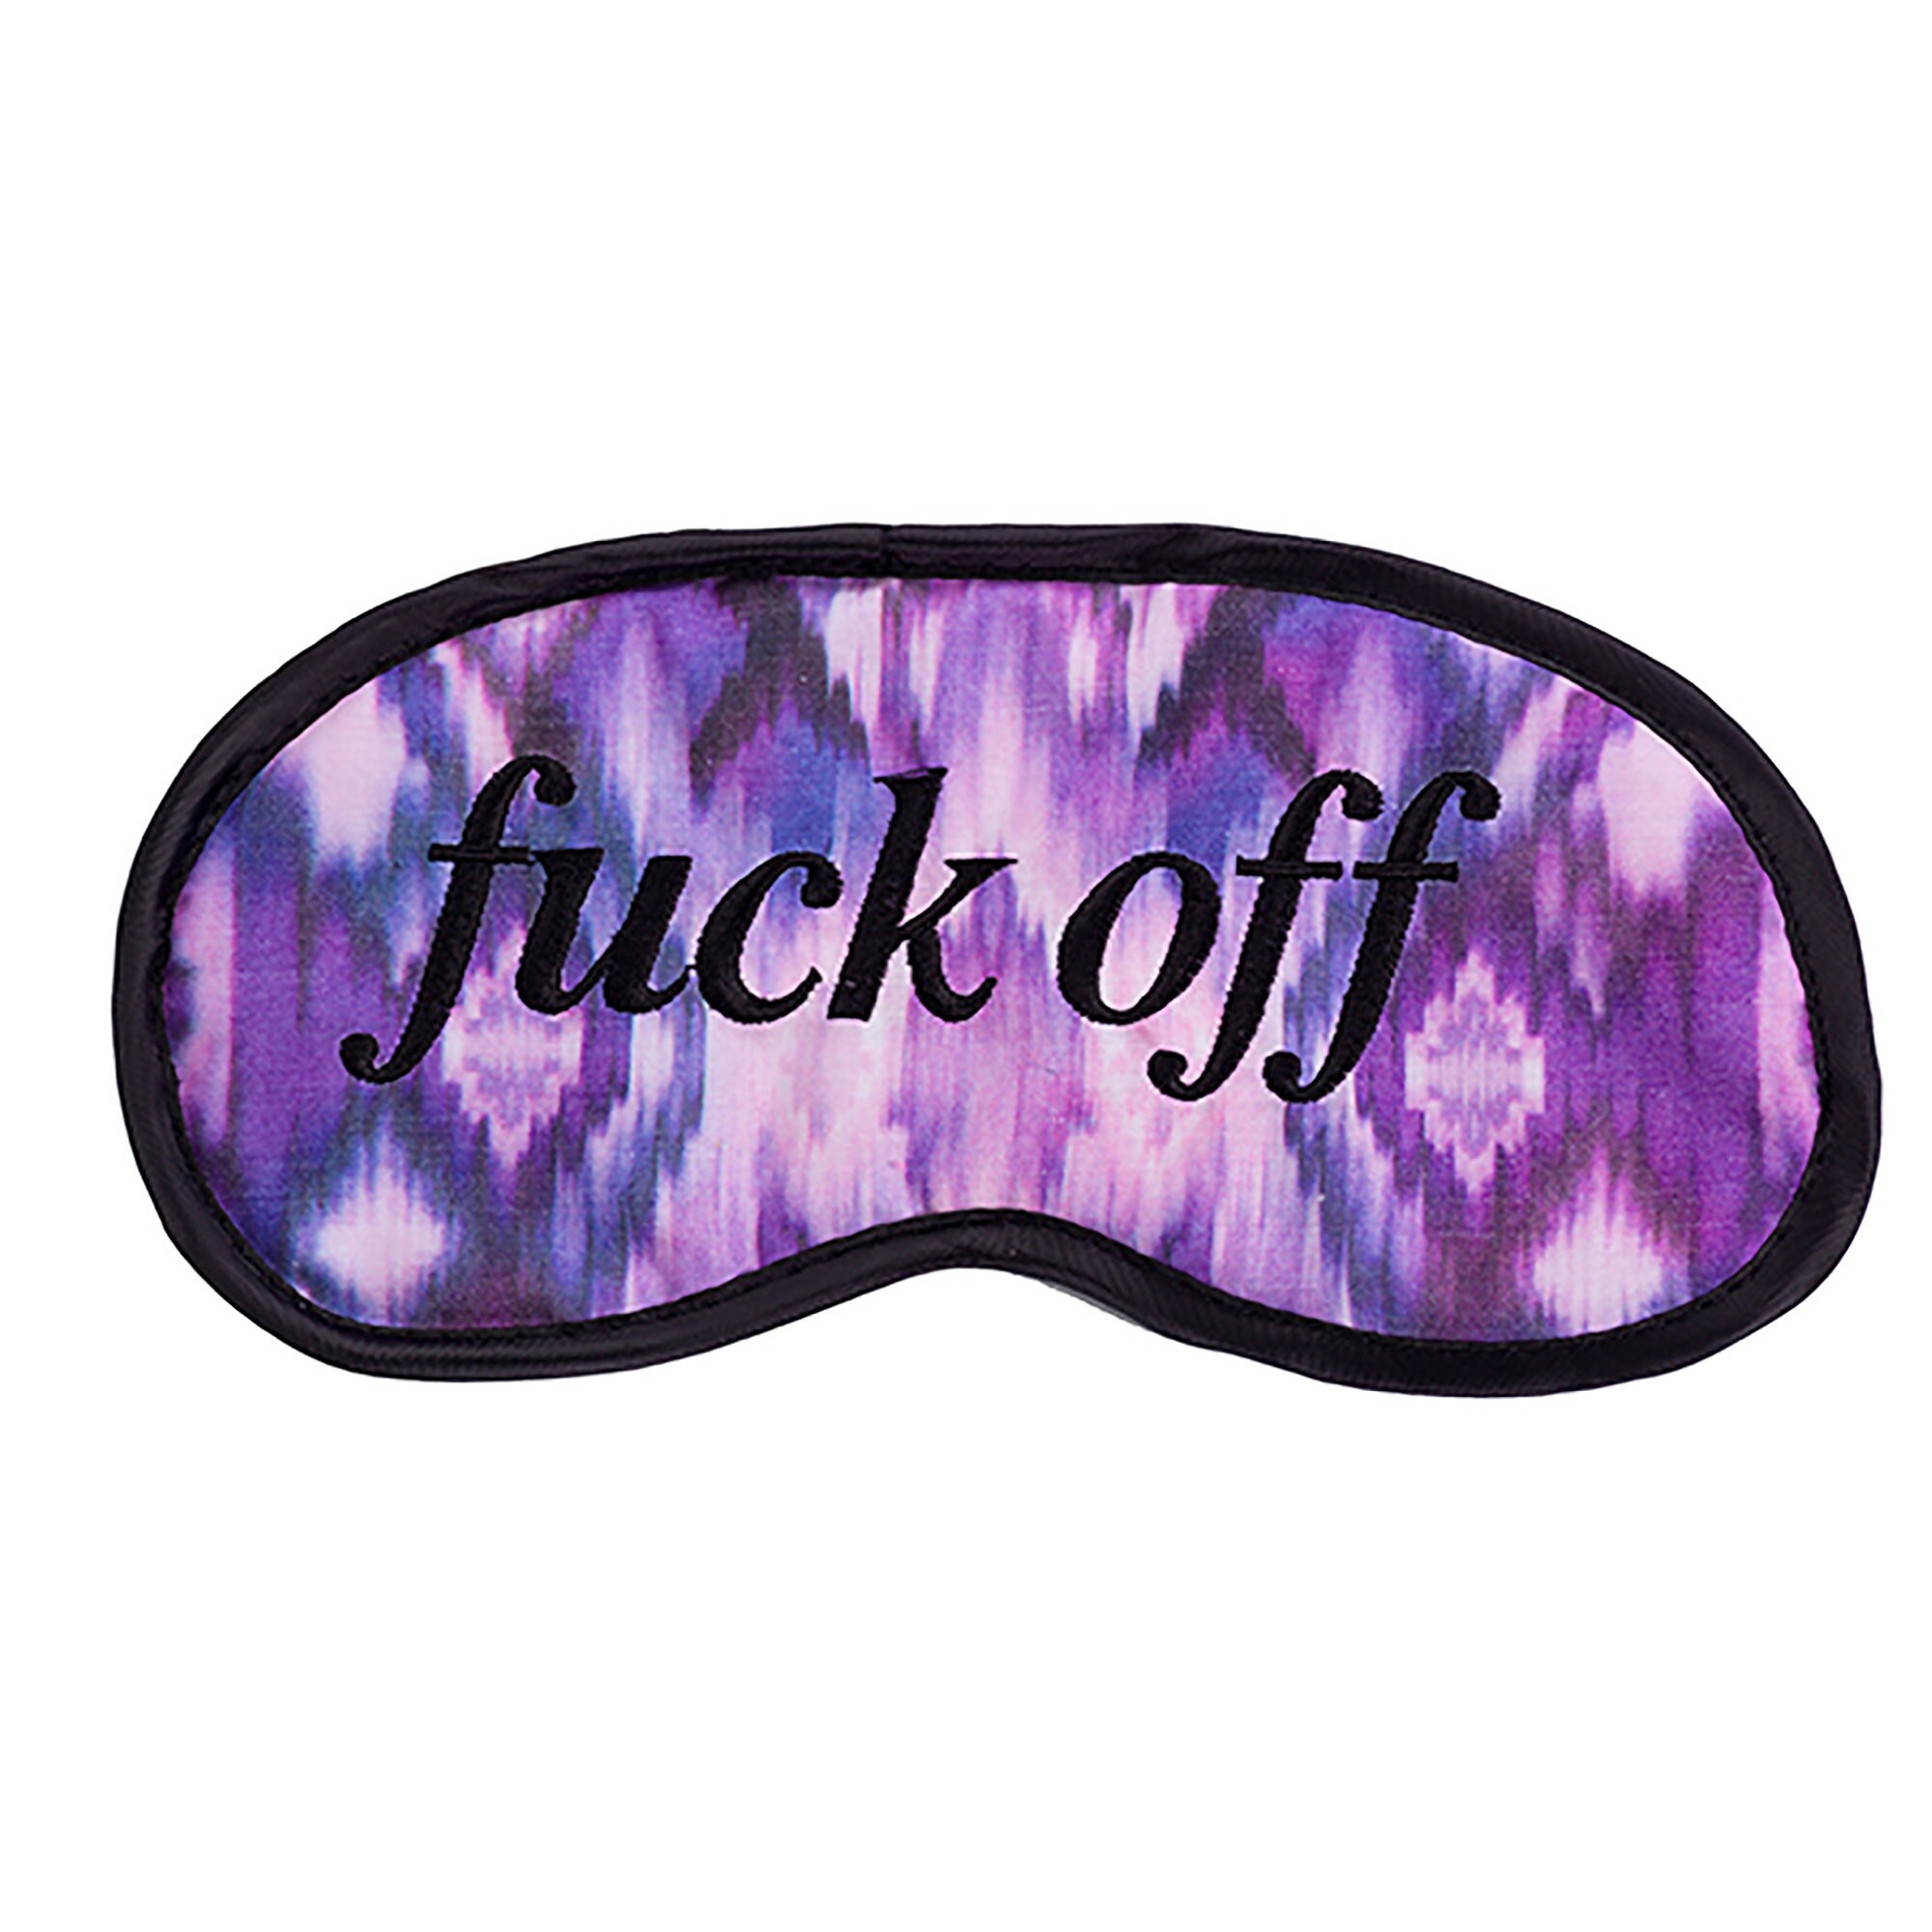 F*ck Off Eyemask Avocado, Floral, Map, Glow In The Dark, Feather Mask etc 